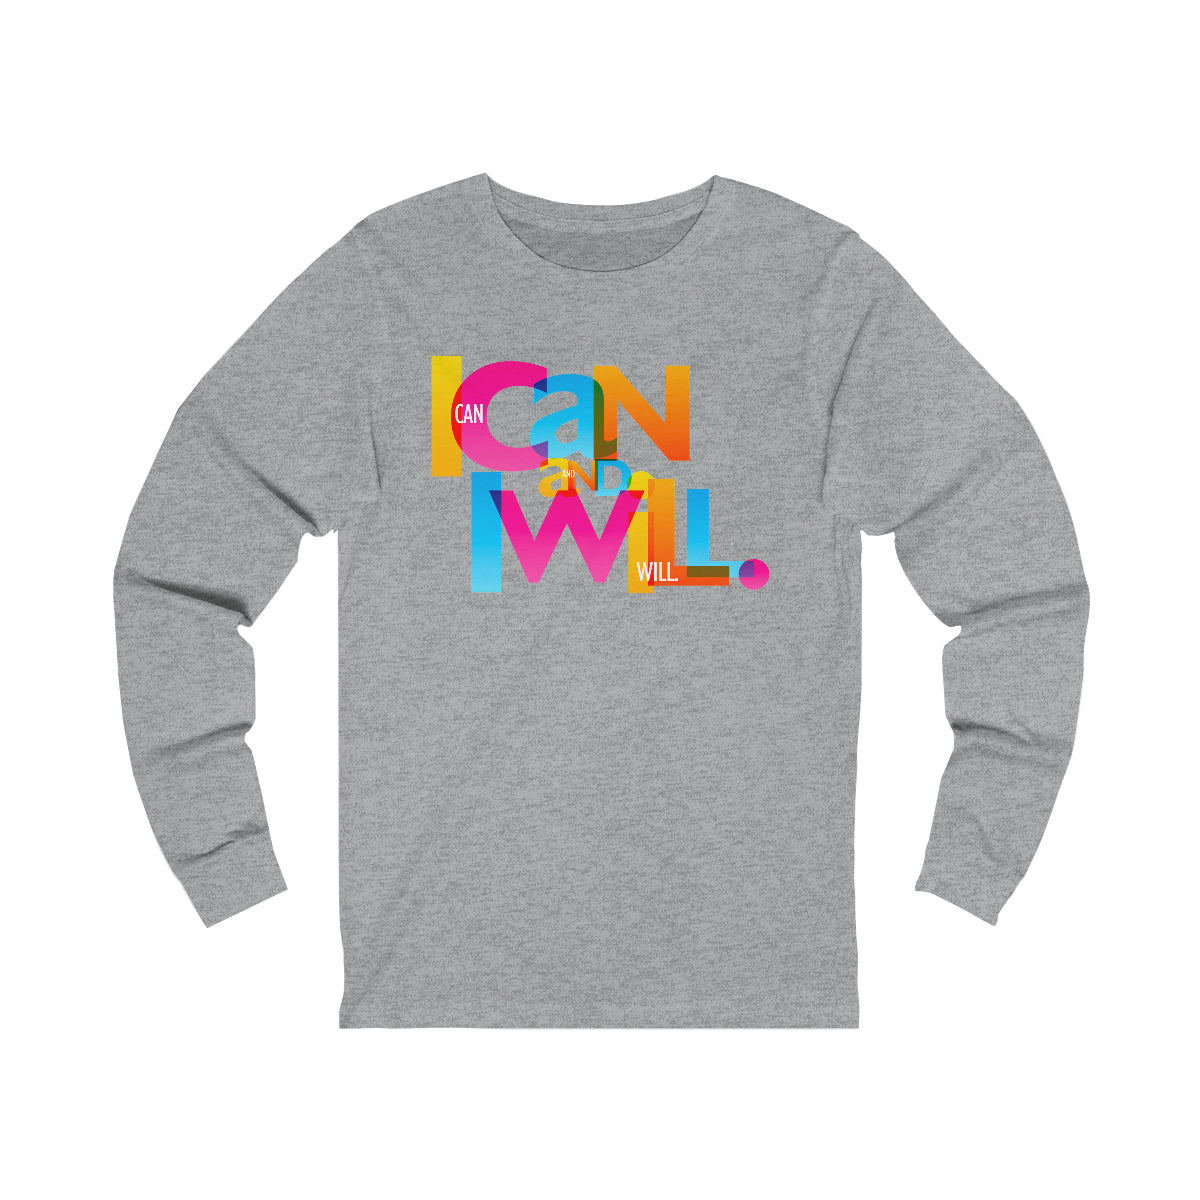 "I Can and I Will" Unisex Jersey Long Sleeve Tee - 11 colors